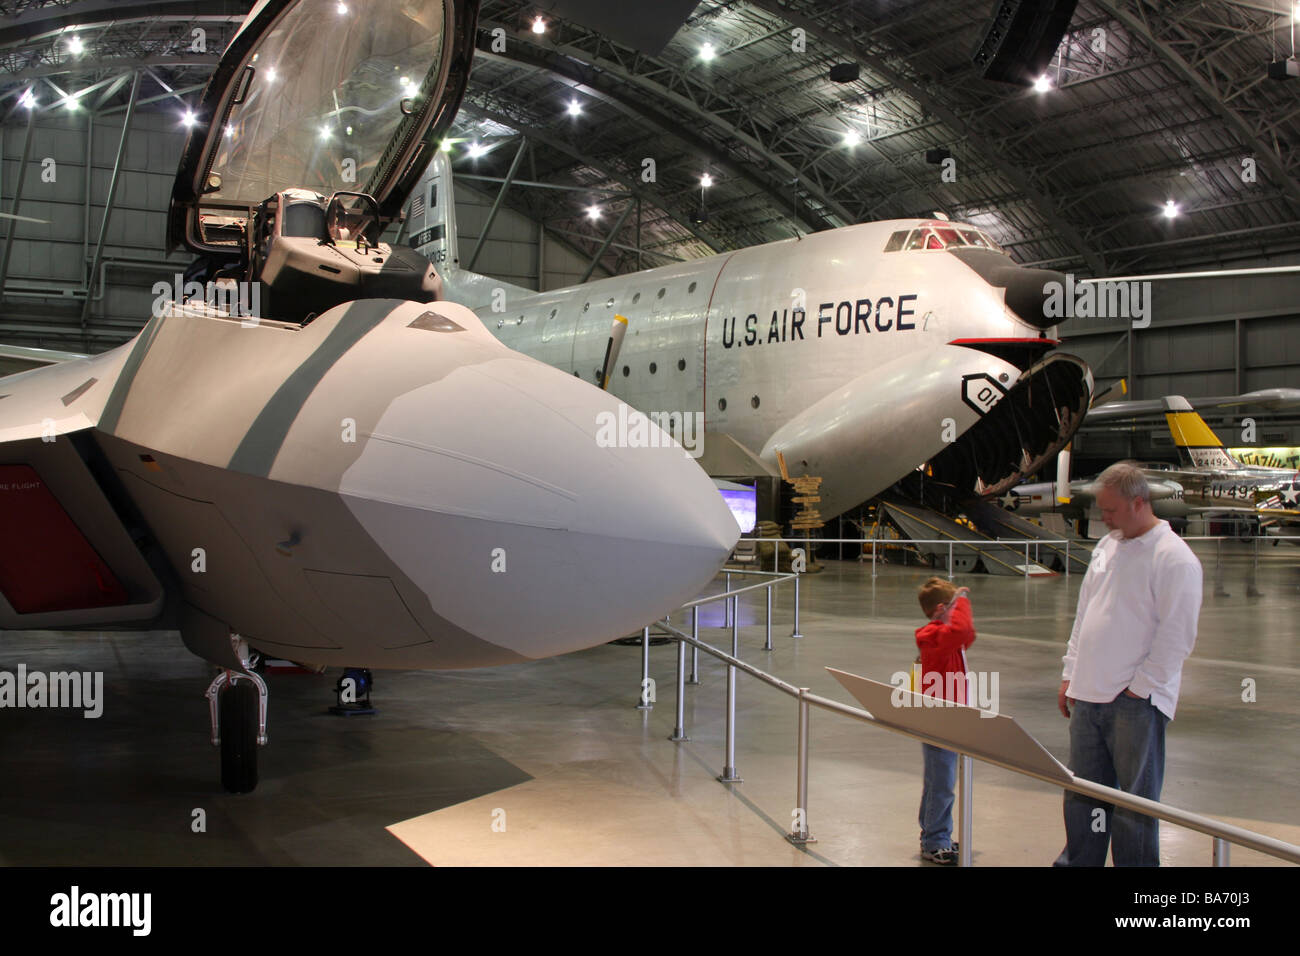 United States Air Force Museum Dayton Ohio wright patterson Stock Photo